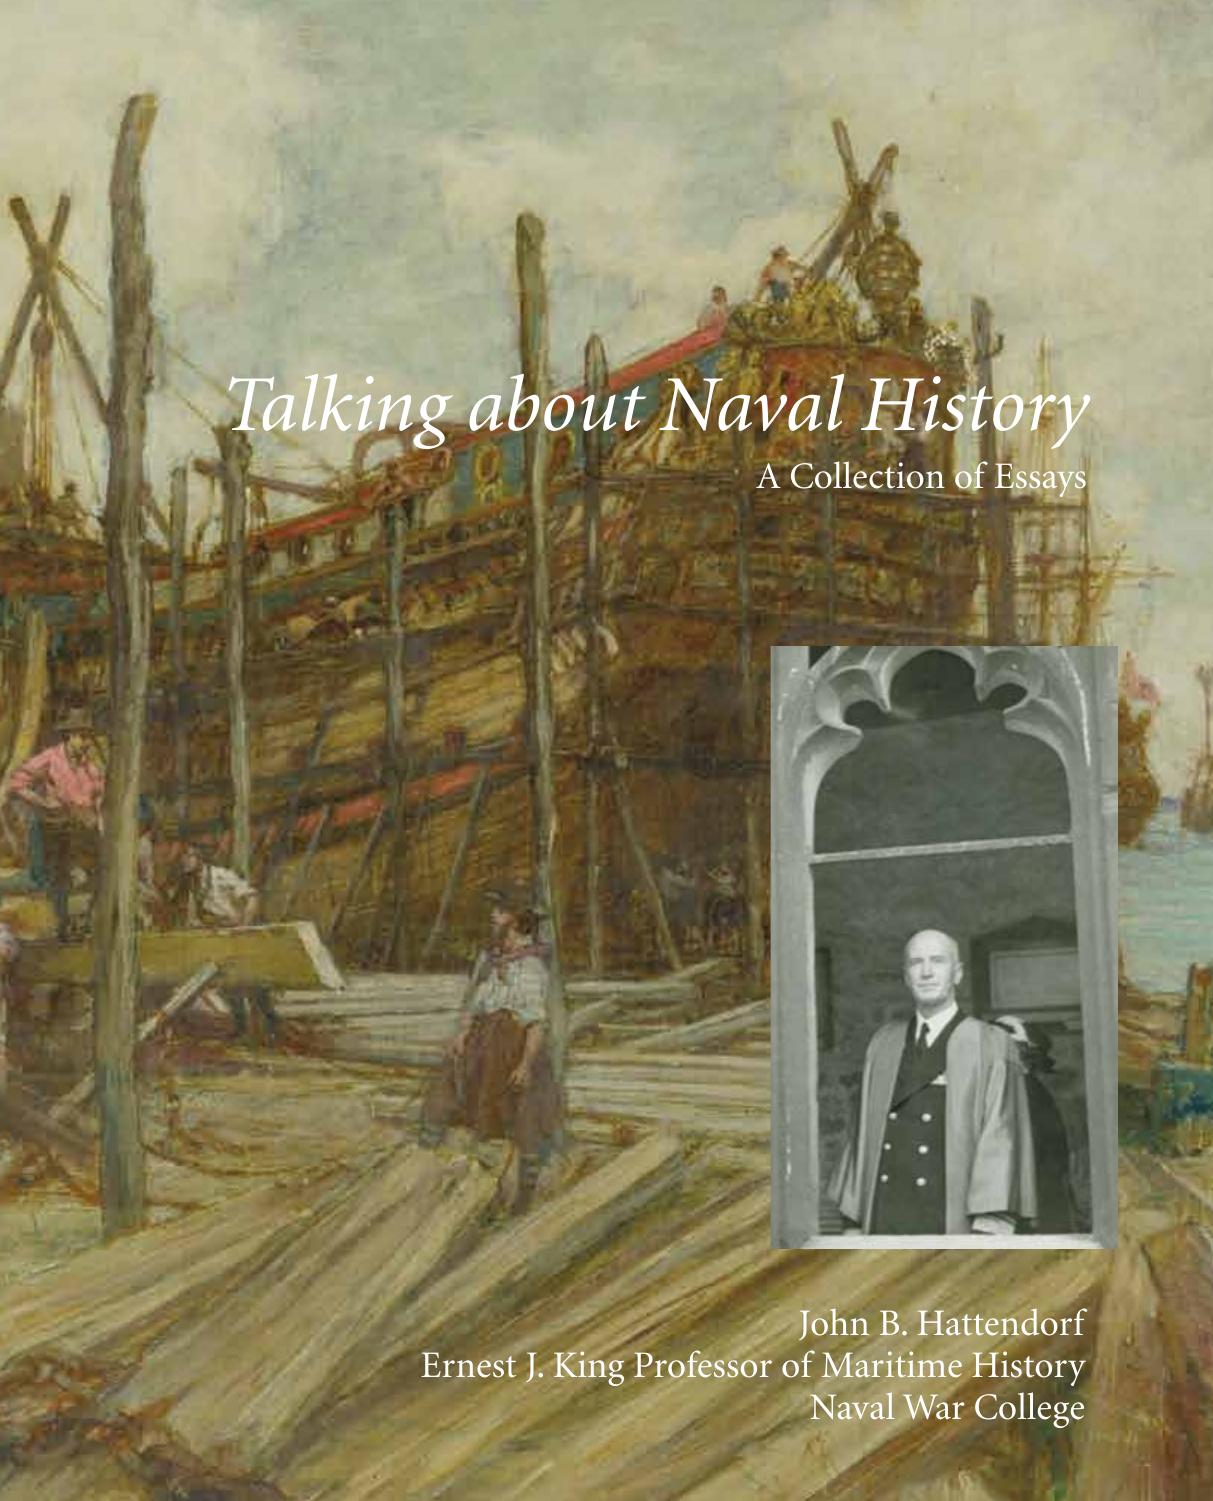 Talking about Naval History : A Collection of Essays by John B. Hattendorf; Naval War College Press (U.S.)